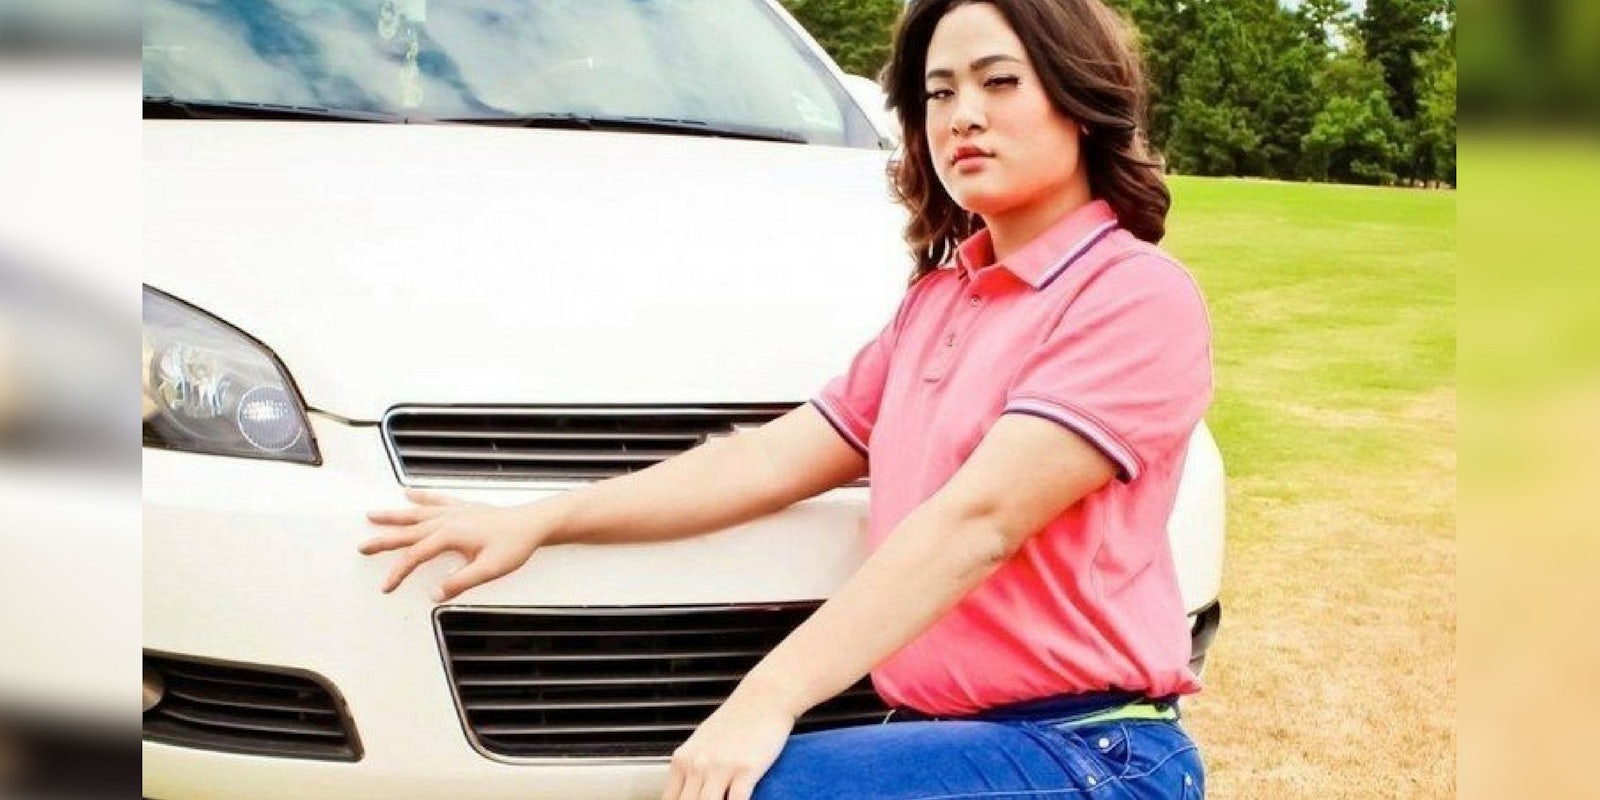 Kami Pham, a transgender teenager whose high school wouldn't let her present as a woman in its year book, kneeling in front of a car.